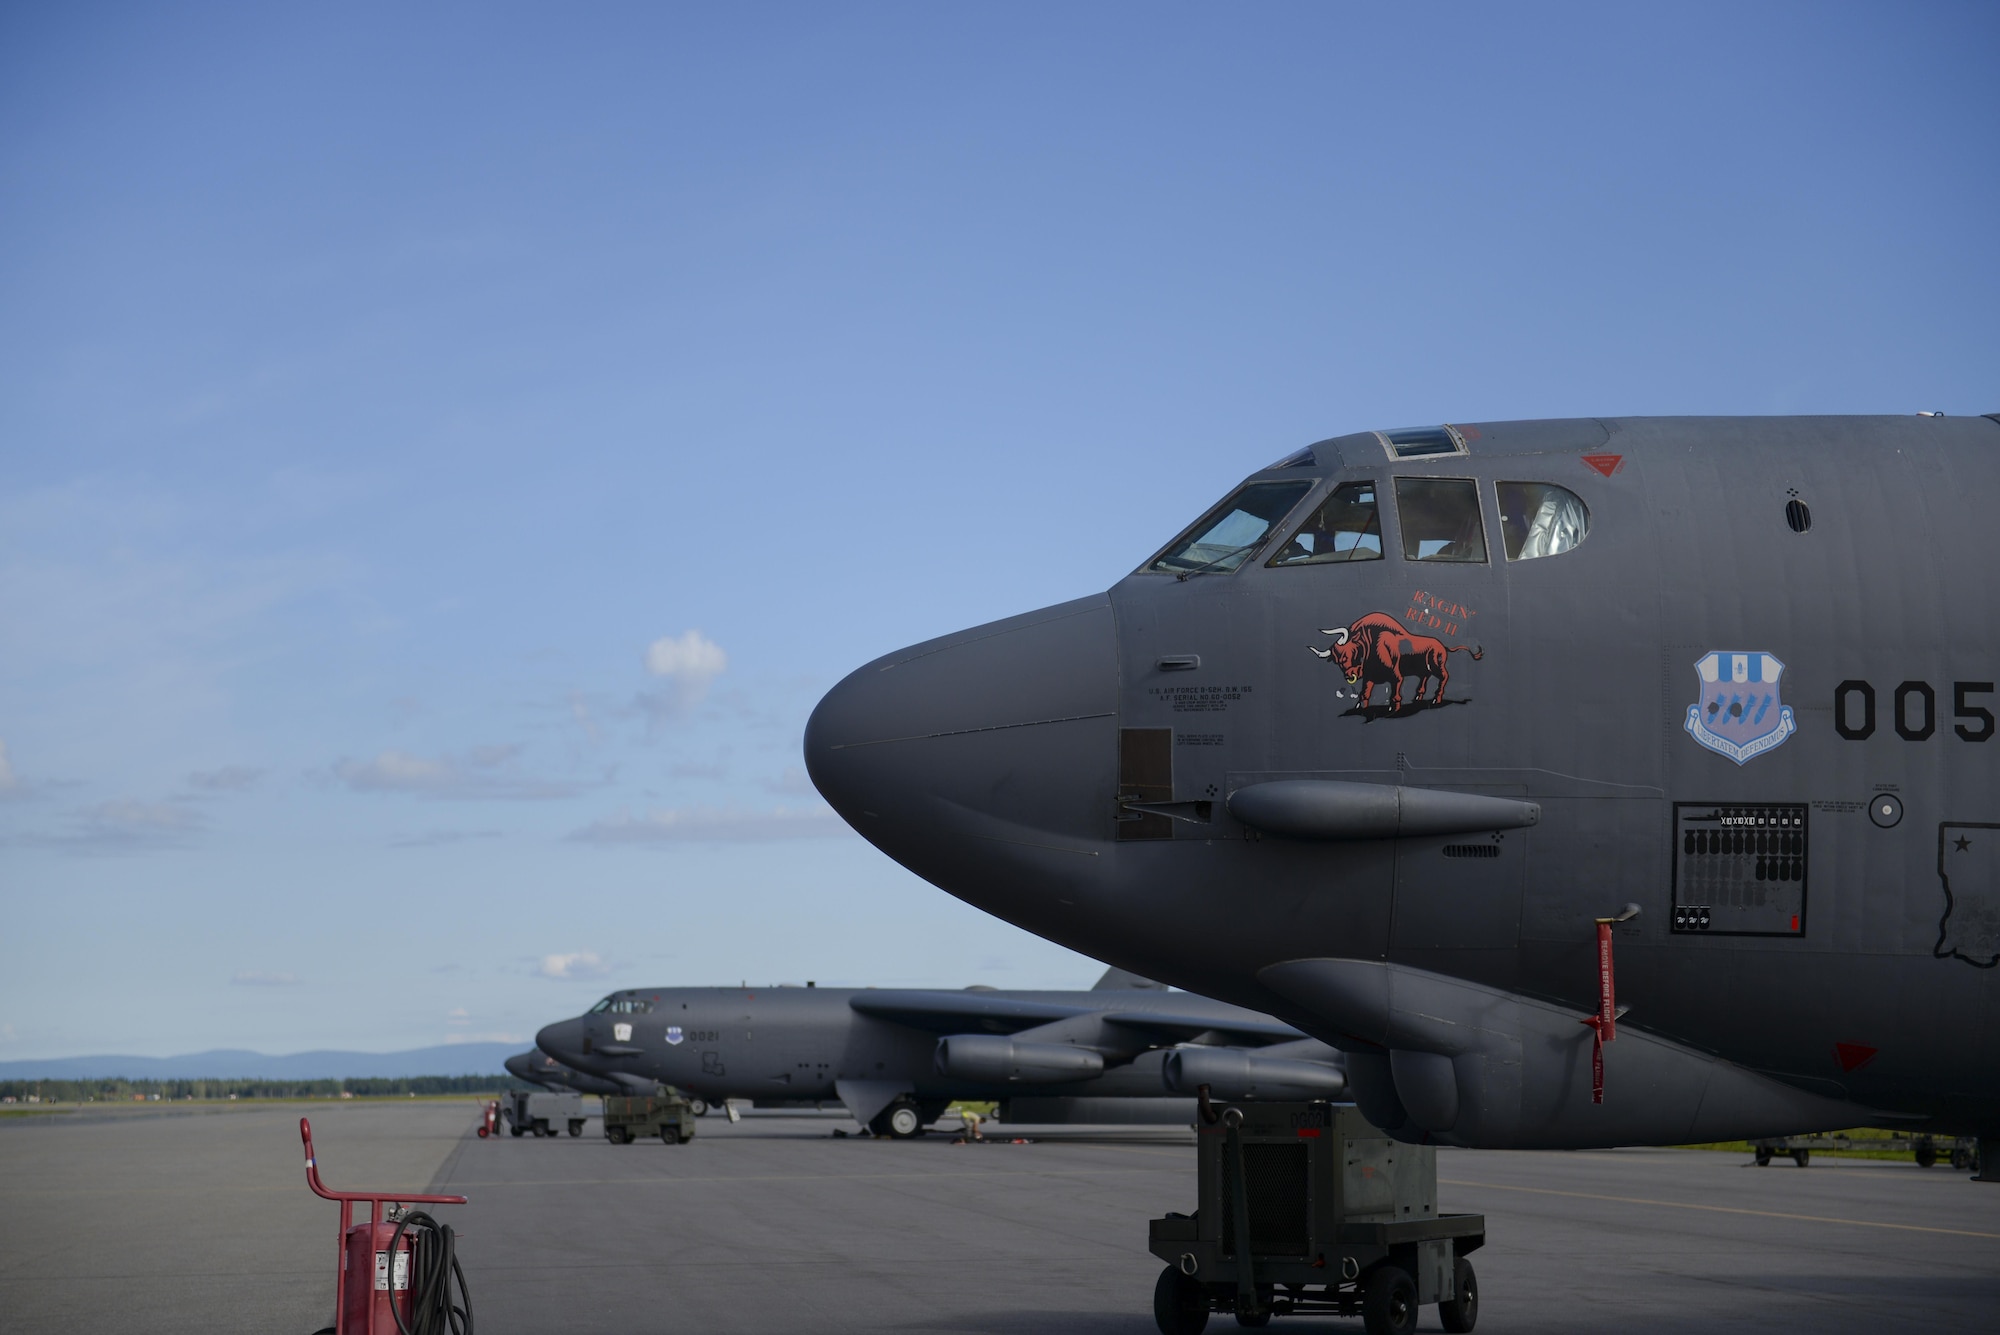 A U.S. Air Force B-52 Stratofortress assigned to the 96th Bomber Squadron, Barksdale Air Force Base (AFB), La., waits on the flight line during RED FLAG-Alaska (RF-A) 17-3, July 28, 2017, at Eielson AFB, Alaska. RF-A provides an optimal training environment in the Indo-Asia-Pacific Region and focuses on improving ground, space, and cyberspace combat readiness and interoperability for U.S. and international forces. (U.S. Air Force photo by Airman 1st Class Isaac Johnson)